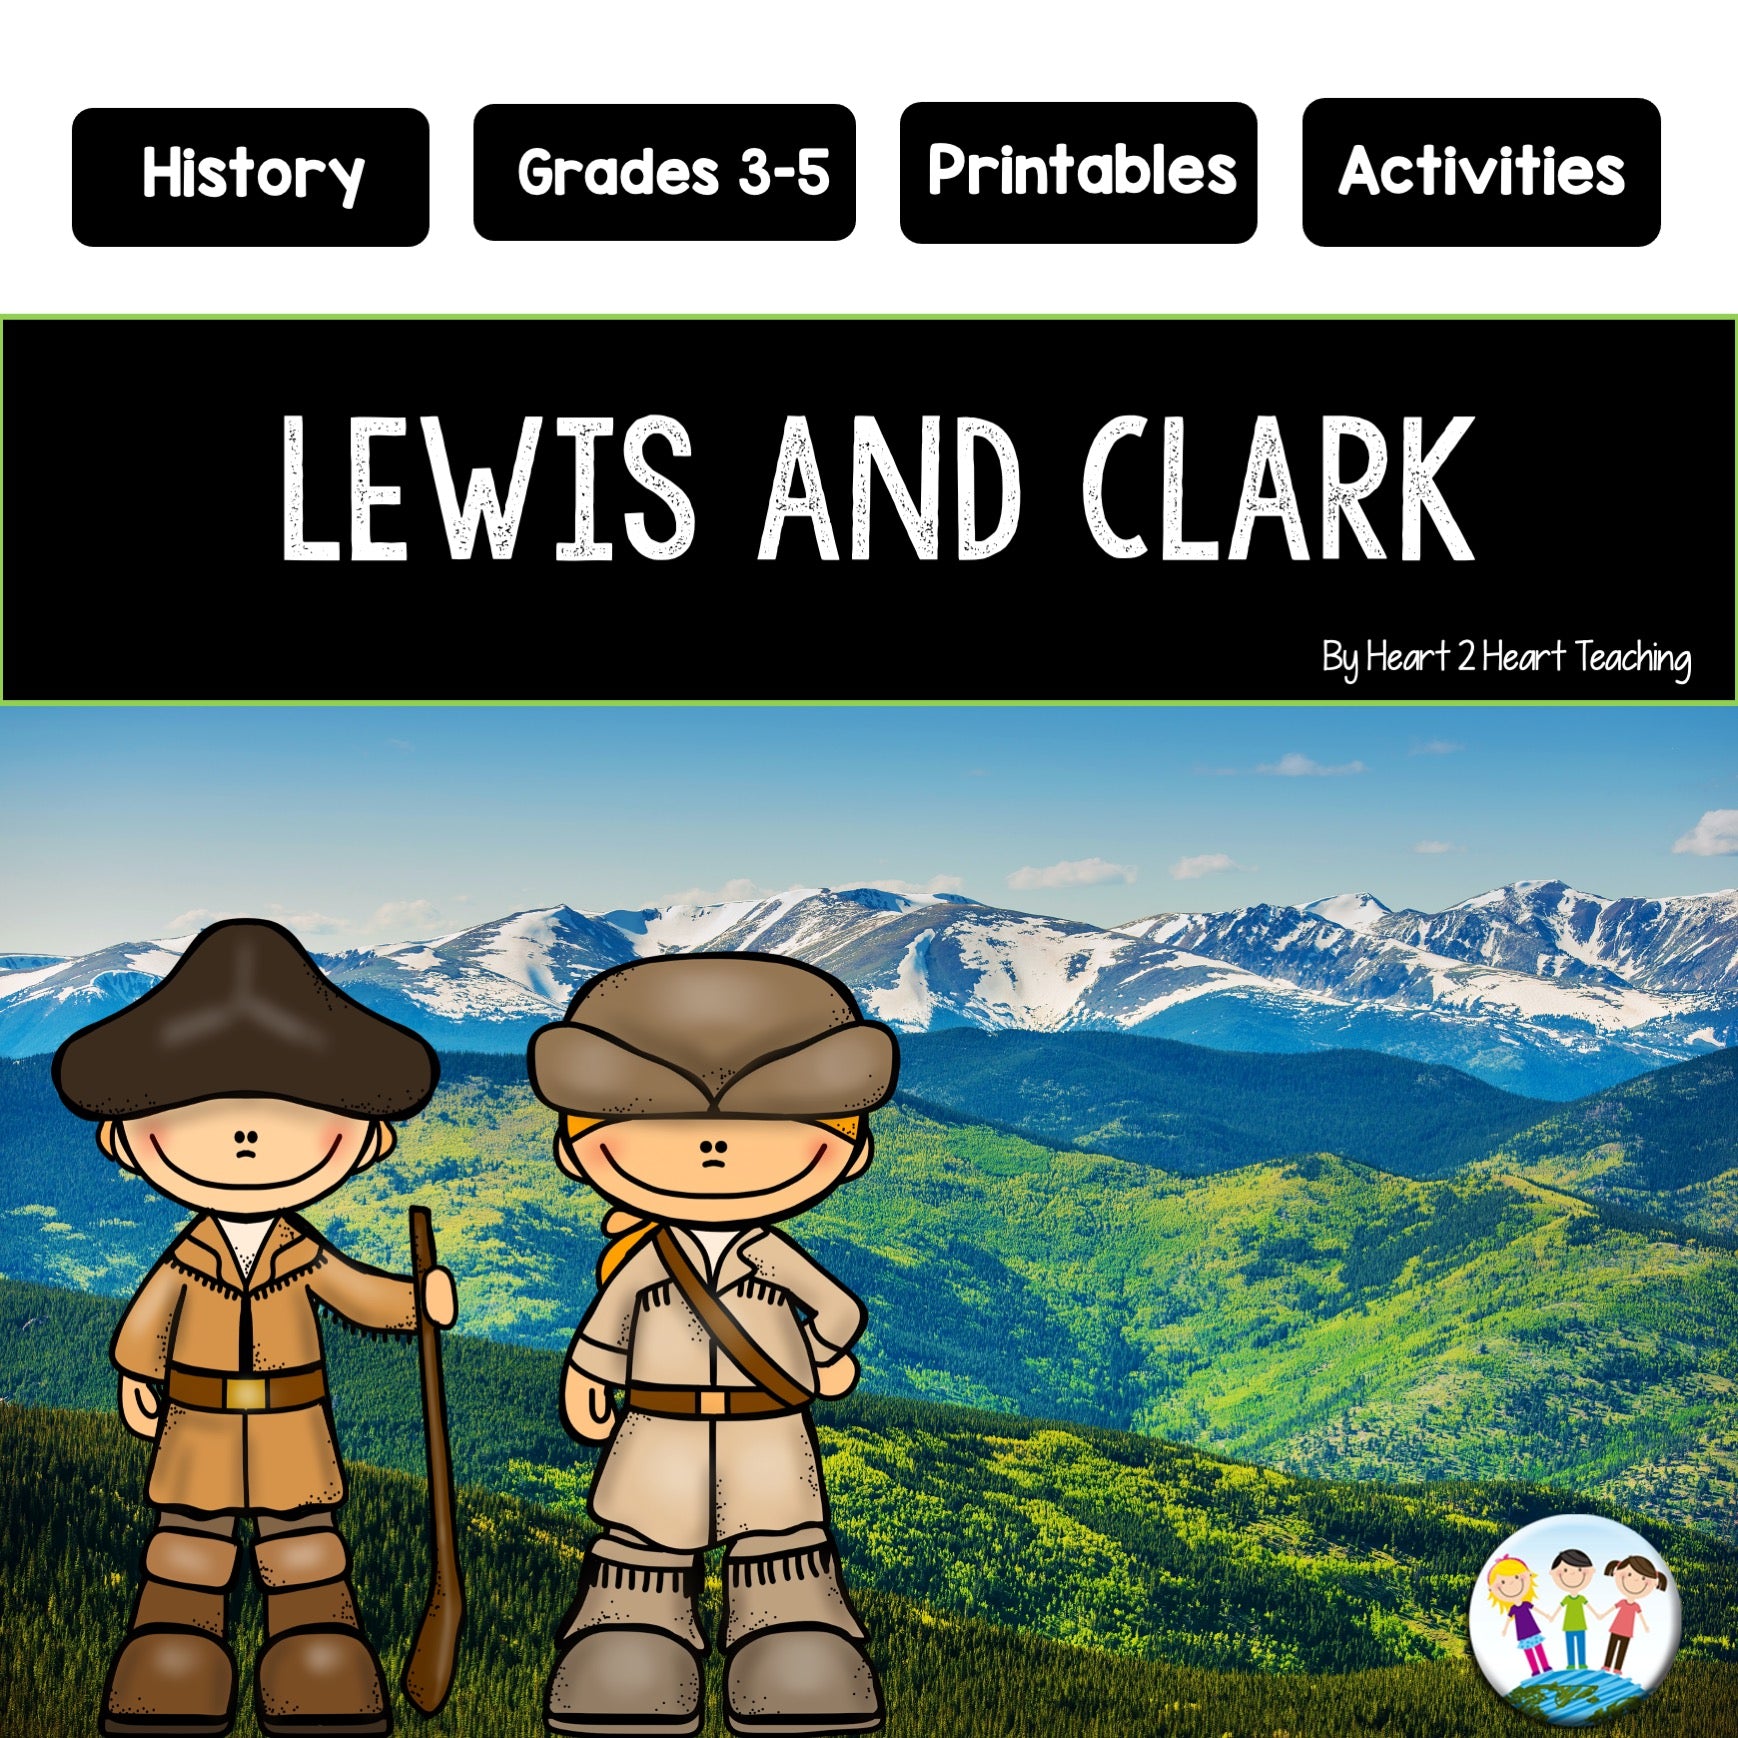 Westward expansion lets learn about the lewis and clark expedition â heart heart teaching